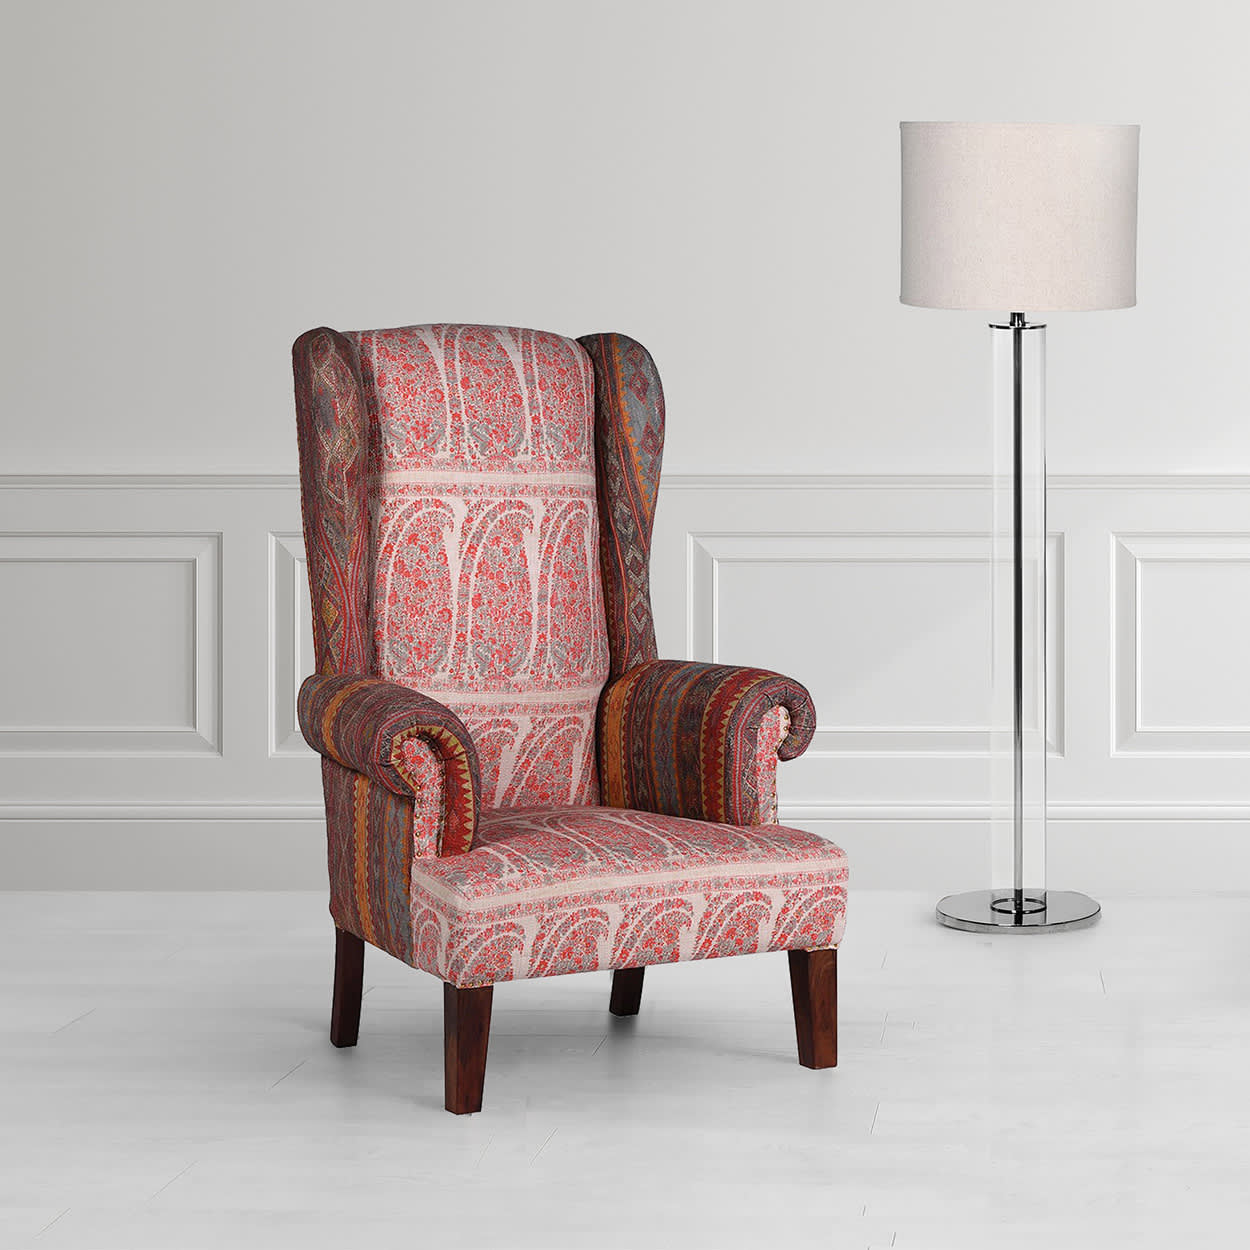 Paisley Patterned Upholstered High Back Armchair